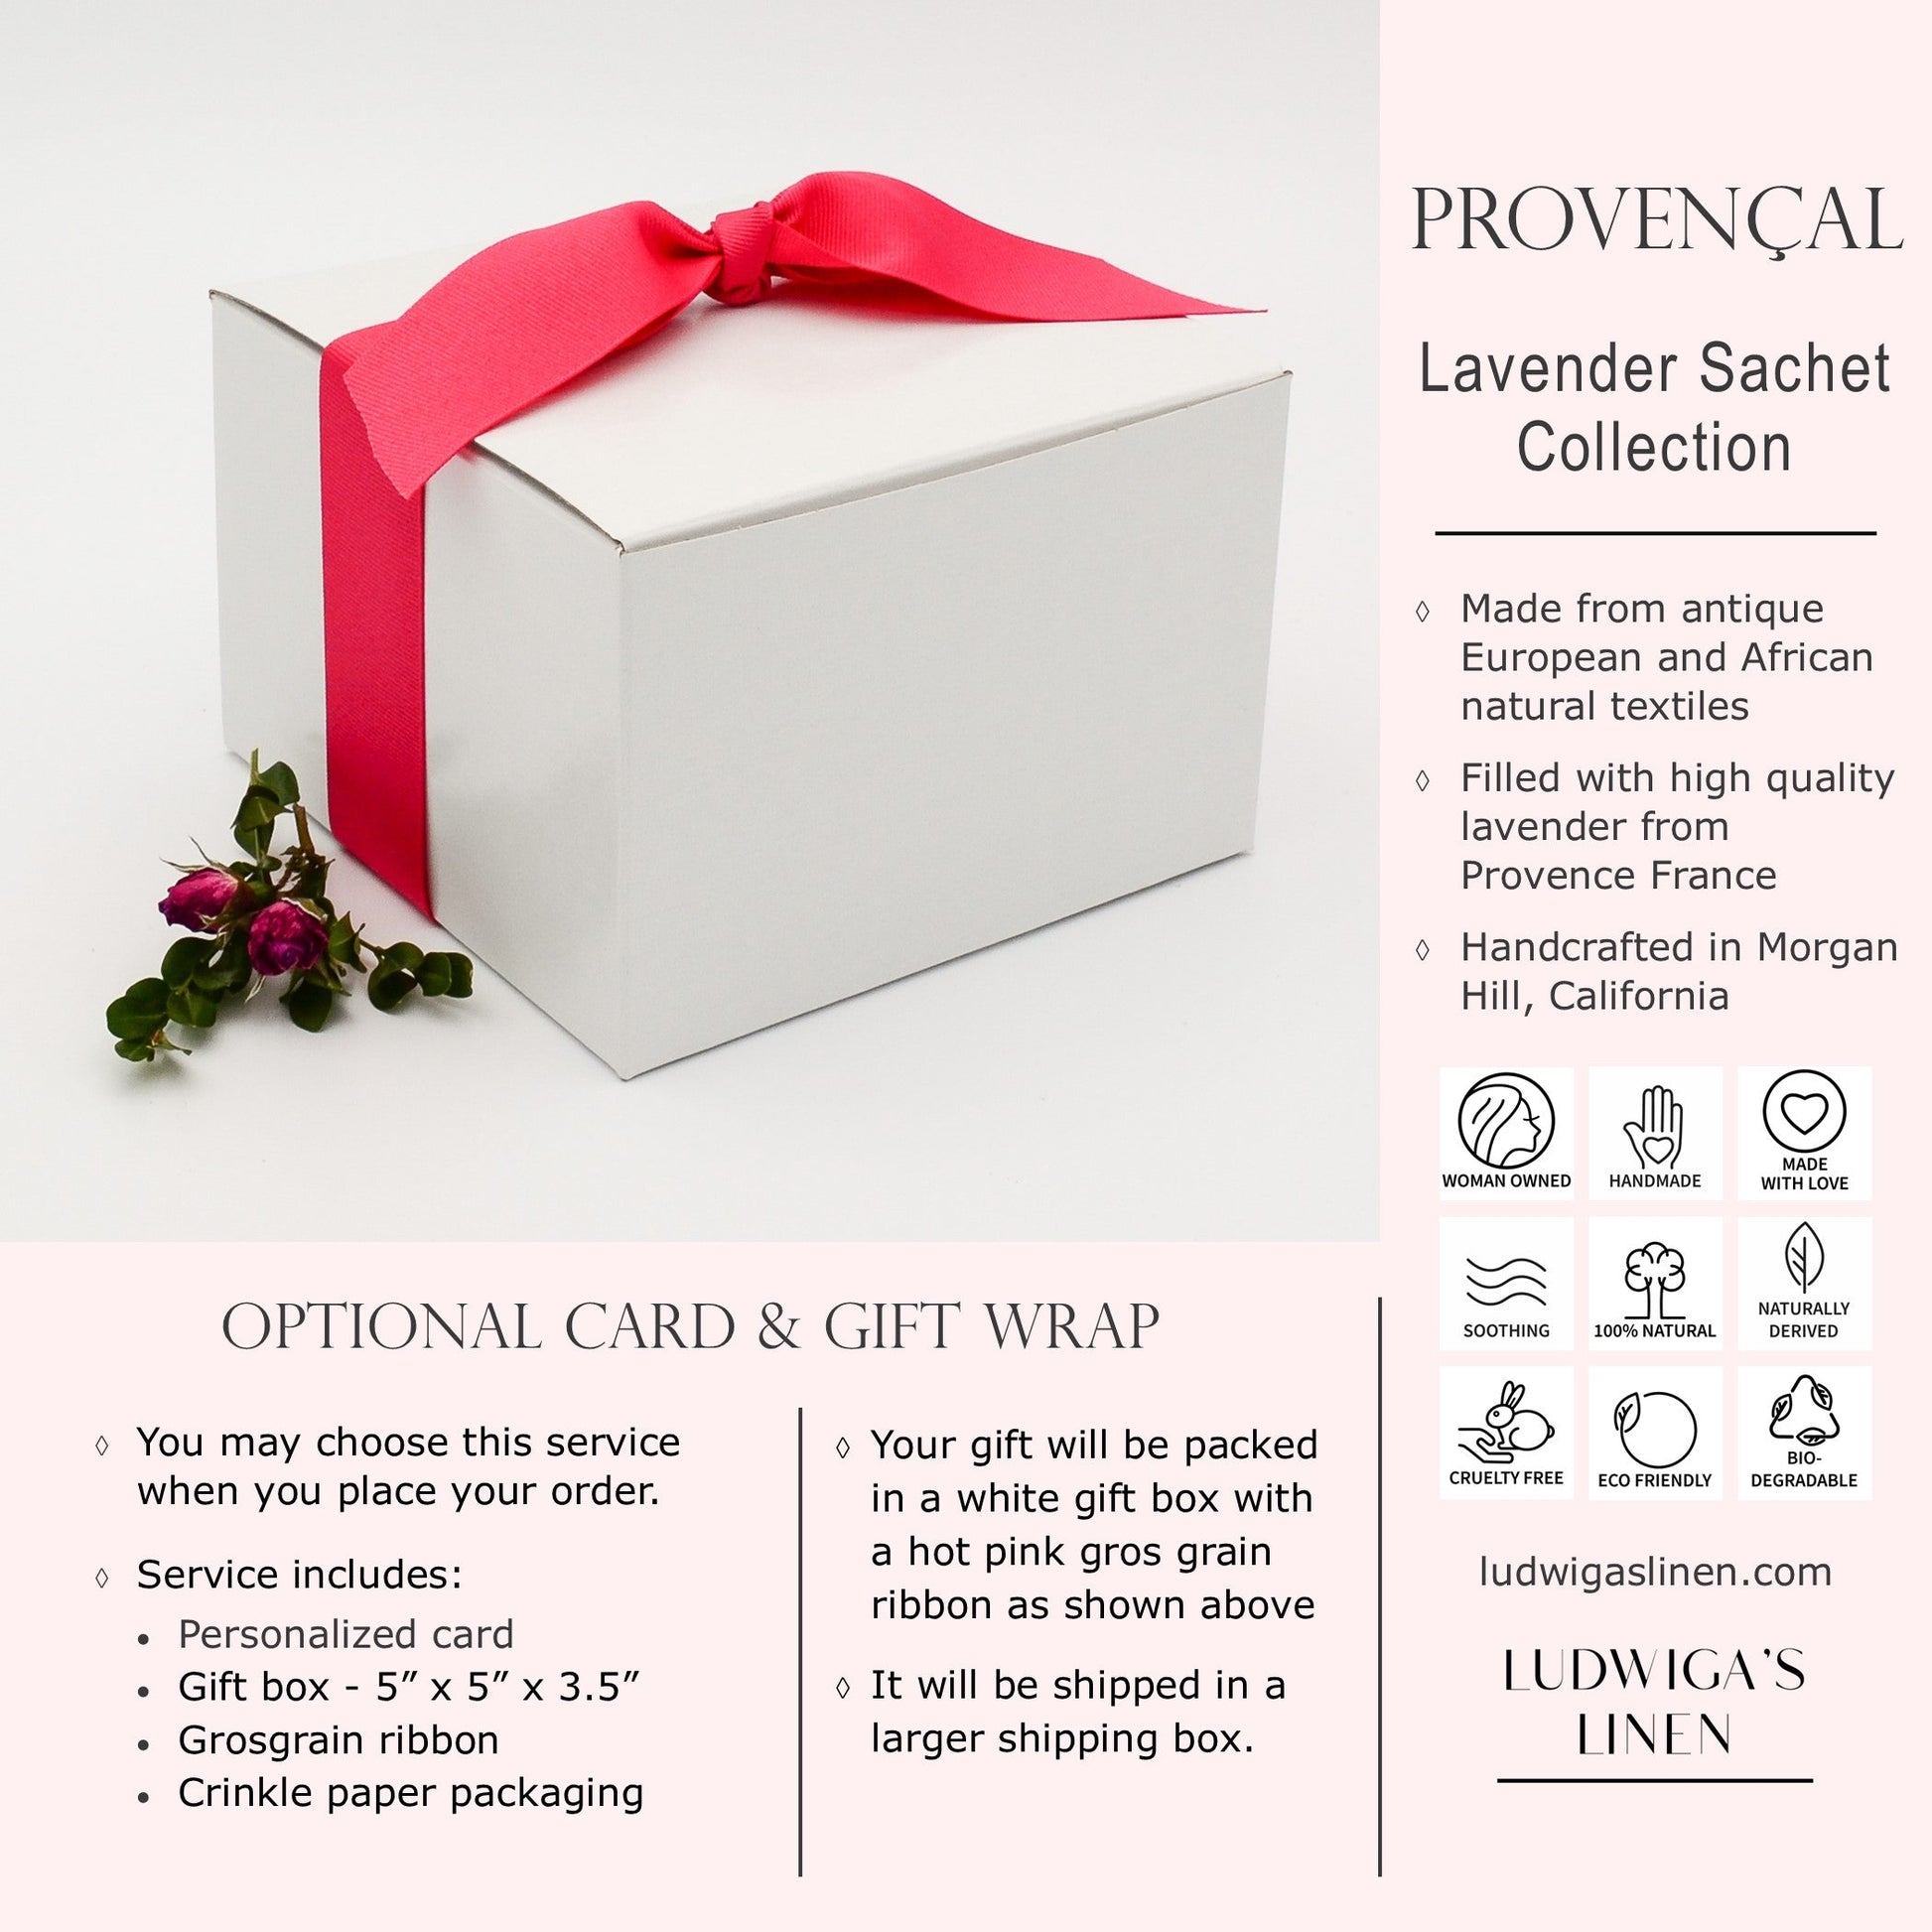 Optional gift box with hot pink gros grain ribbon, information about Ludwiga's Linen Provençal sachet collection and shipping information